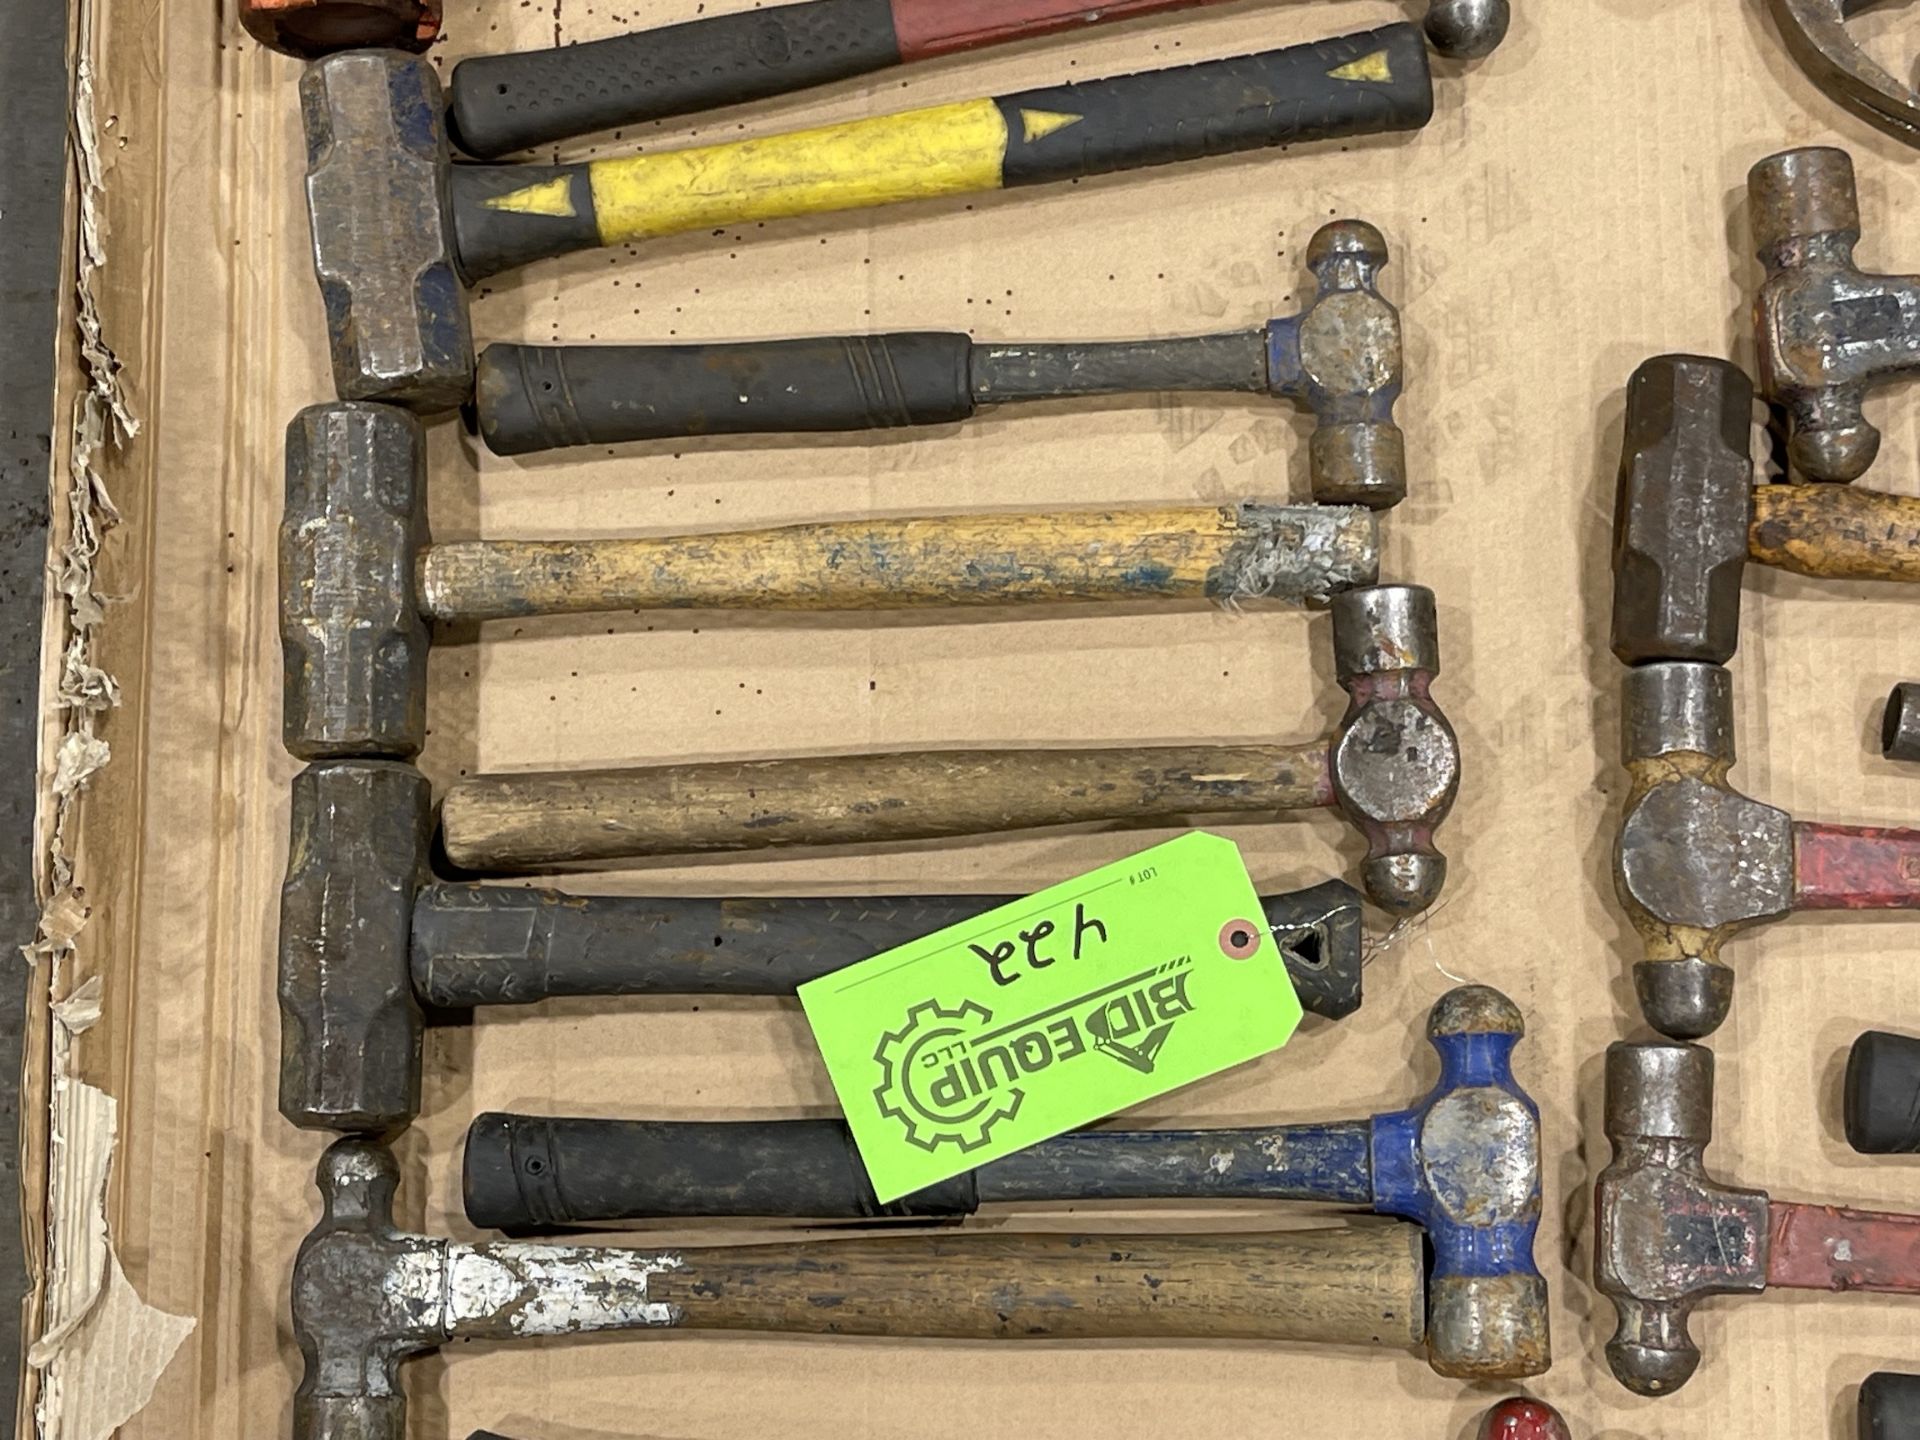 Lot of Hammers - Upland - Image 9 of 11